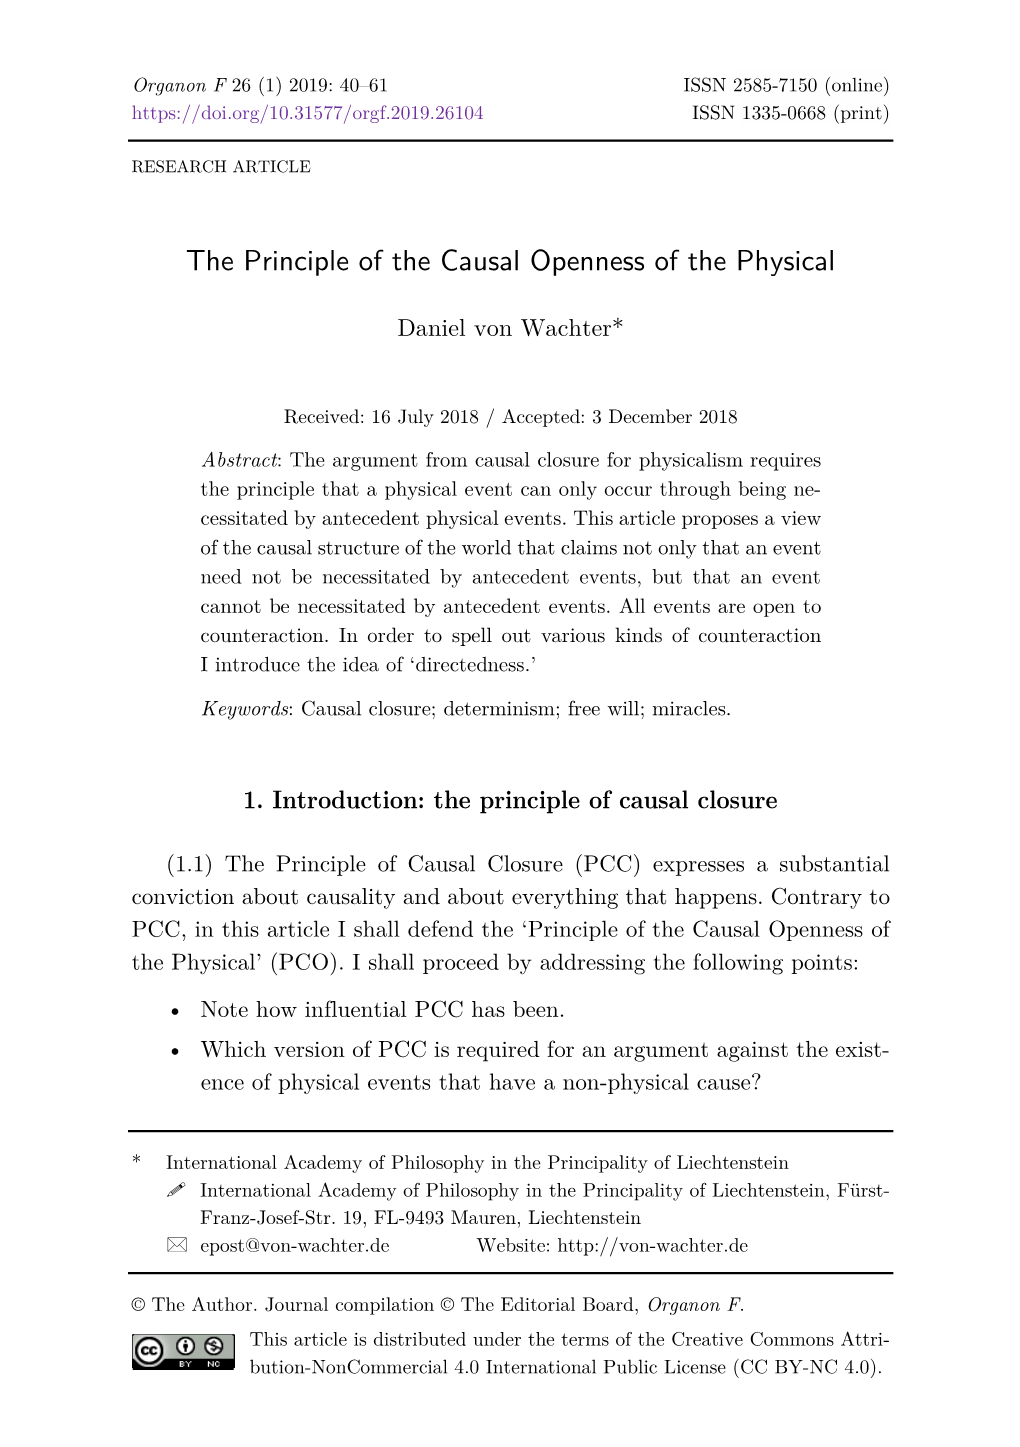 The Principle of the Causal Openness of the Physical